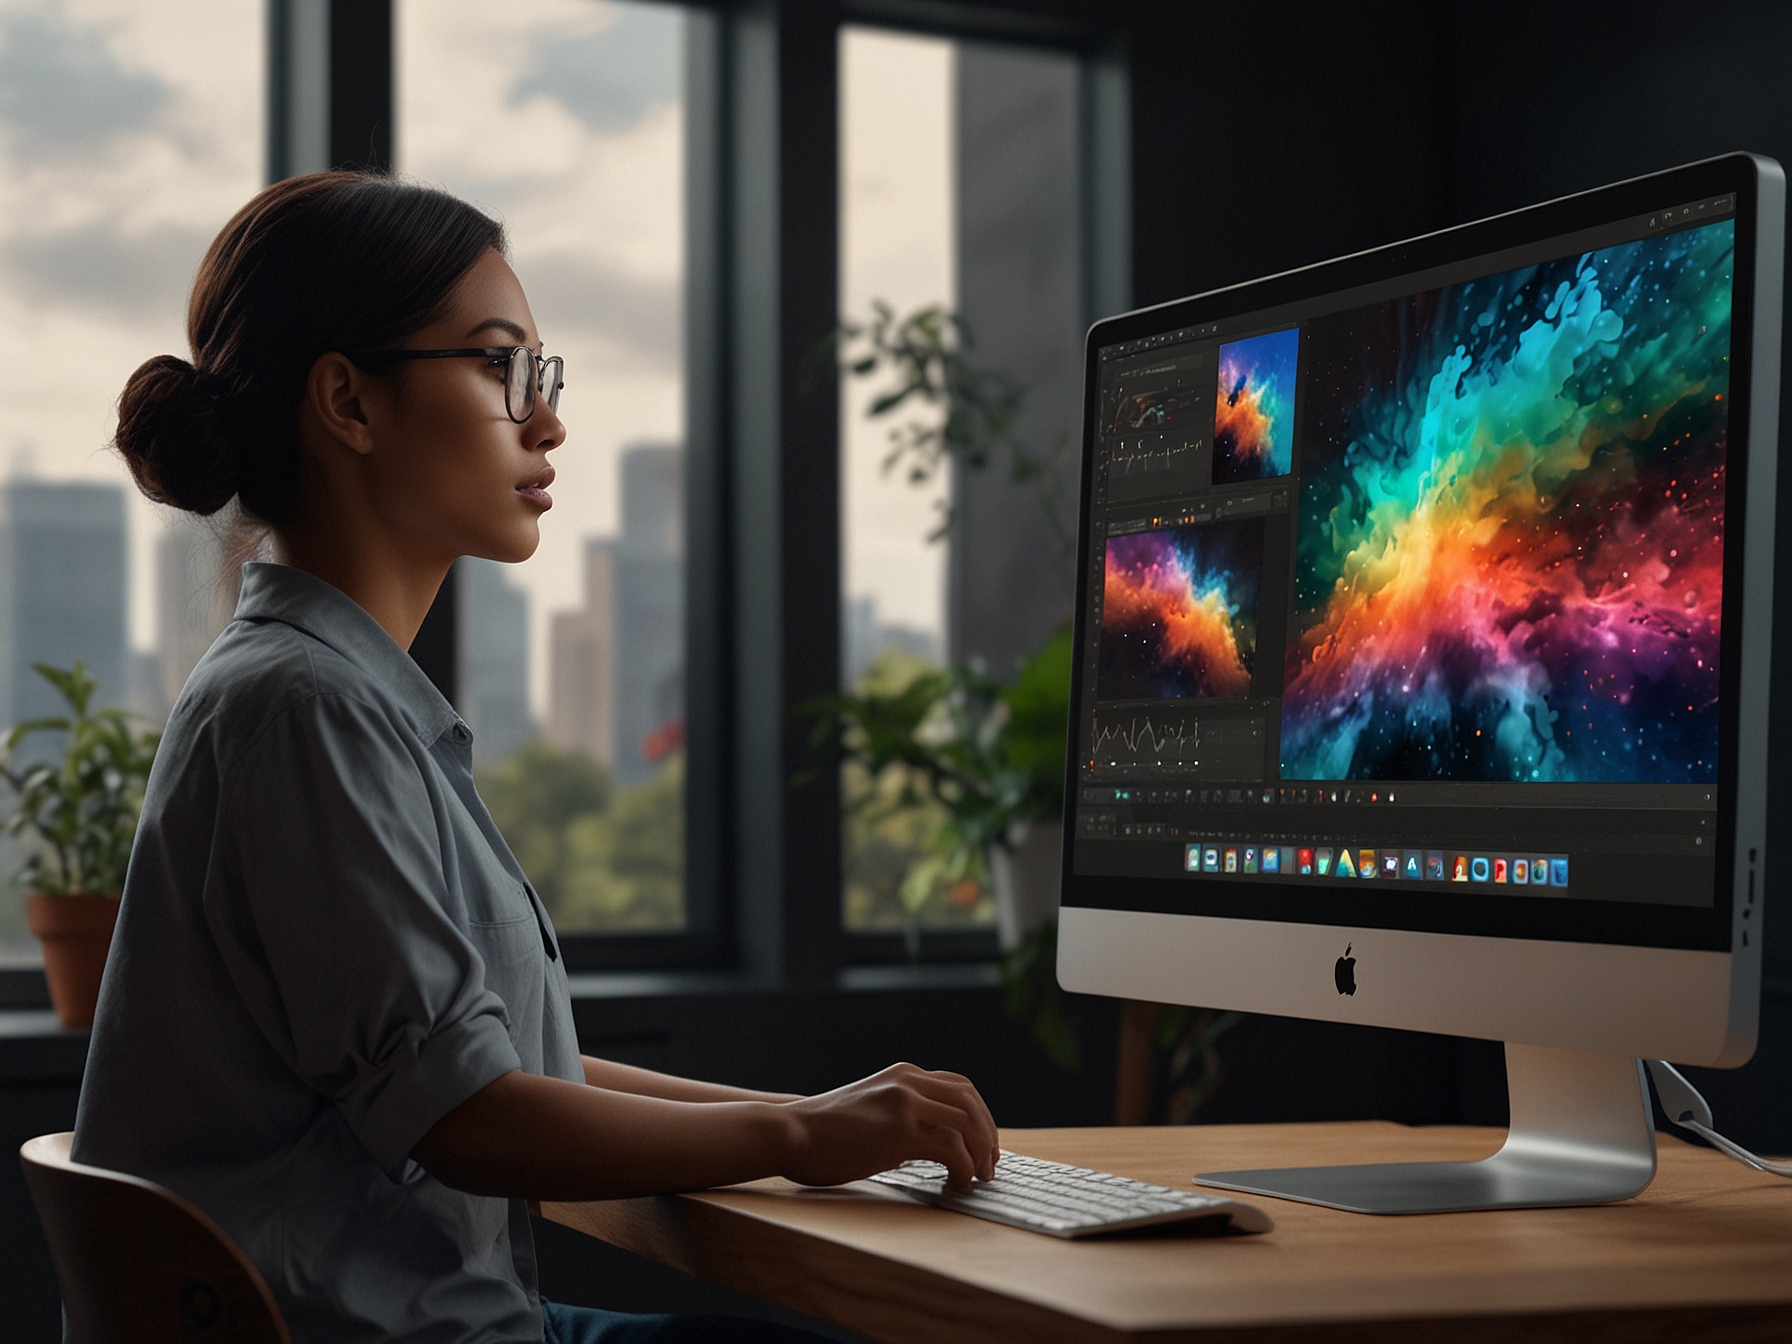 A sleek Apple Pro Display XDR in use with Mac systems, highlighting its stunning 6K Retina display and adjustable ergonomic stand, perfect for detailed video editing.